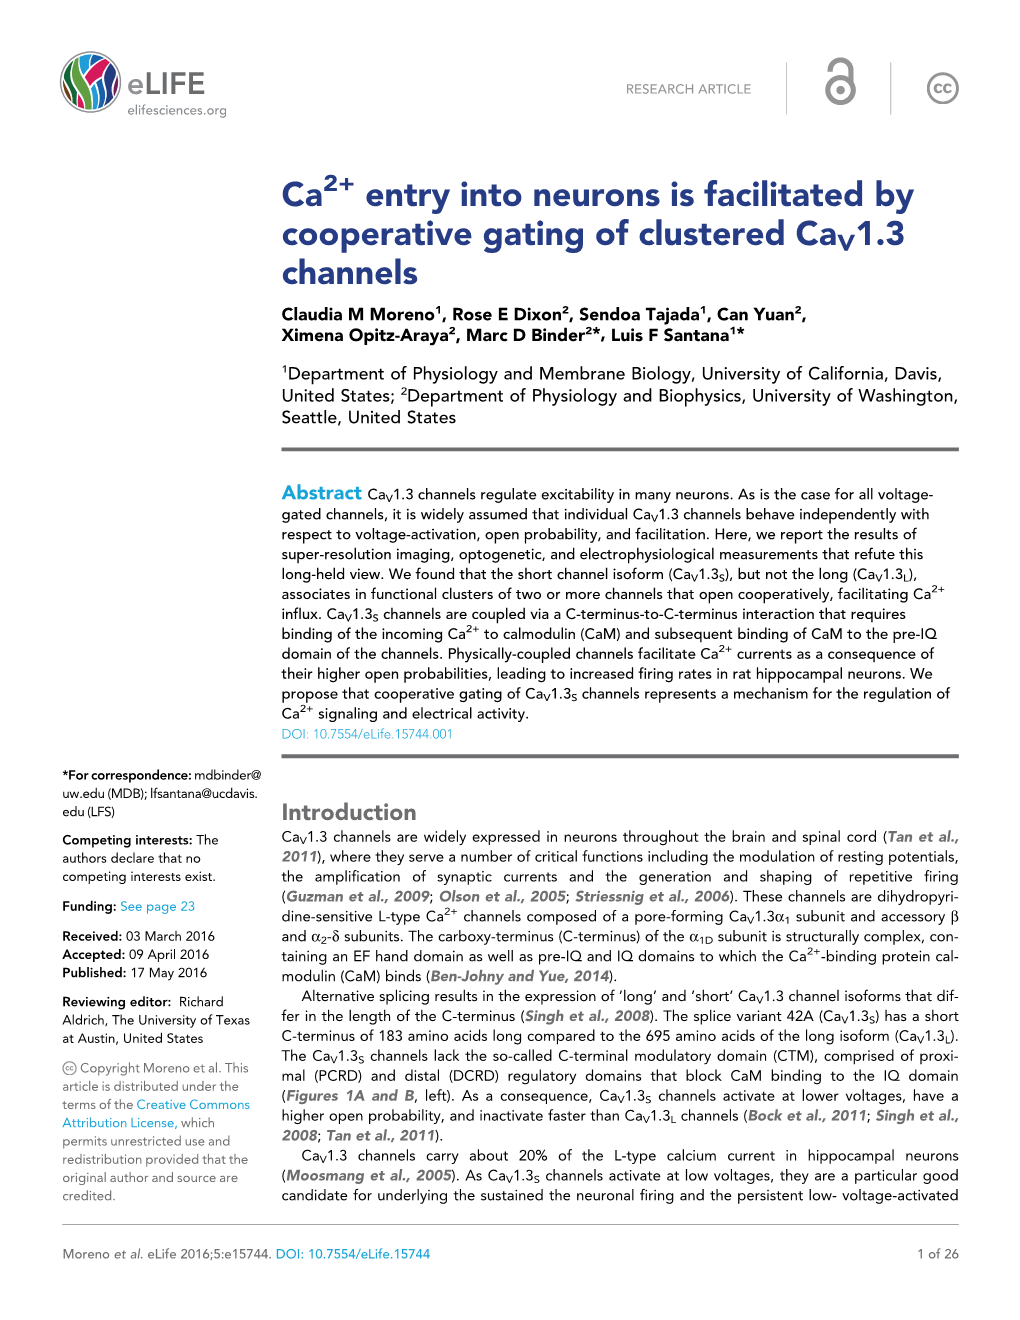 Ca Entry Into Neurons Is Facilitated by Cooperative Gating of Clustered